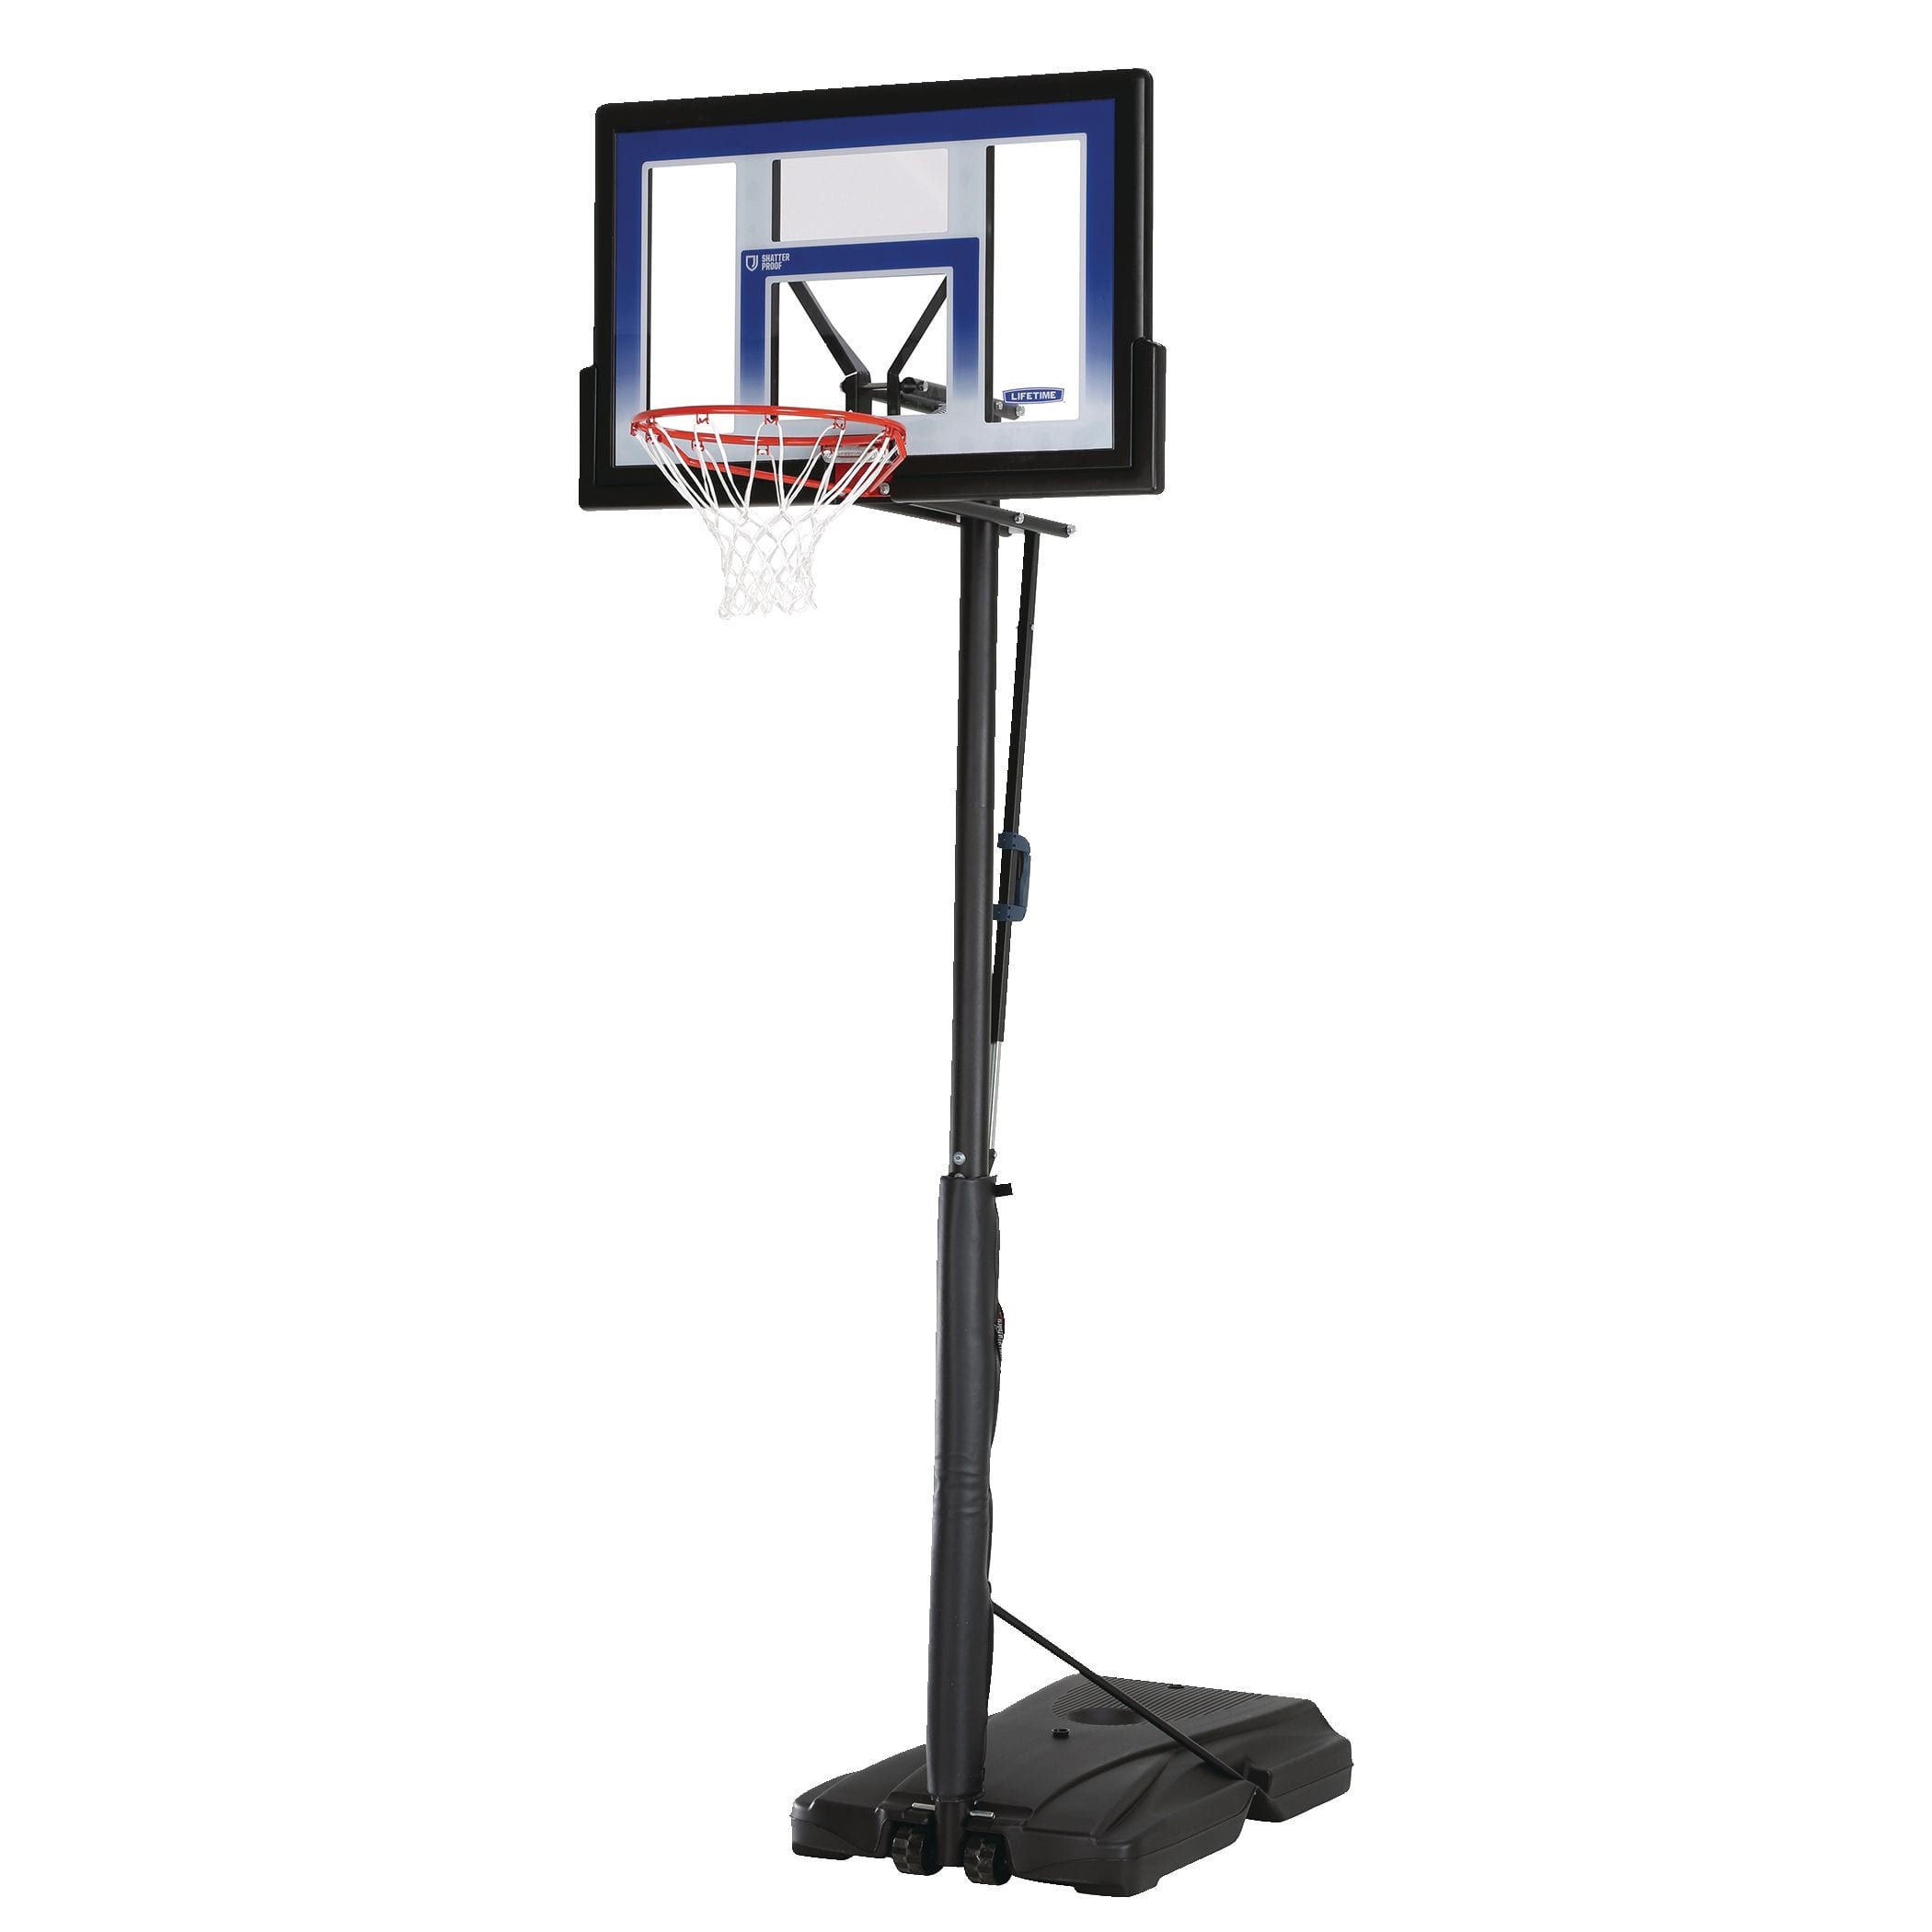 https://media-www.canadiantire.ca/product/playing/team-sports-and-golf/sports-equipment-accessories/1840822/lifetime-48-adjustable-polycarbonate-portable-system-847dfdcb-9966-45e6-8e19-2c5b1cbd9bcd-jpgrendition.jpg